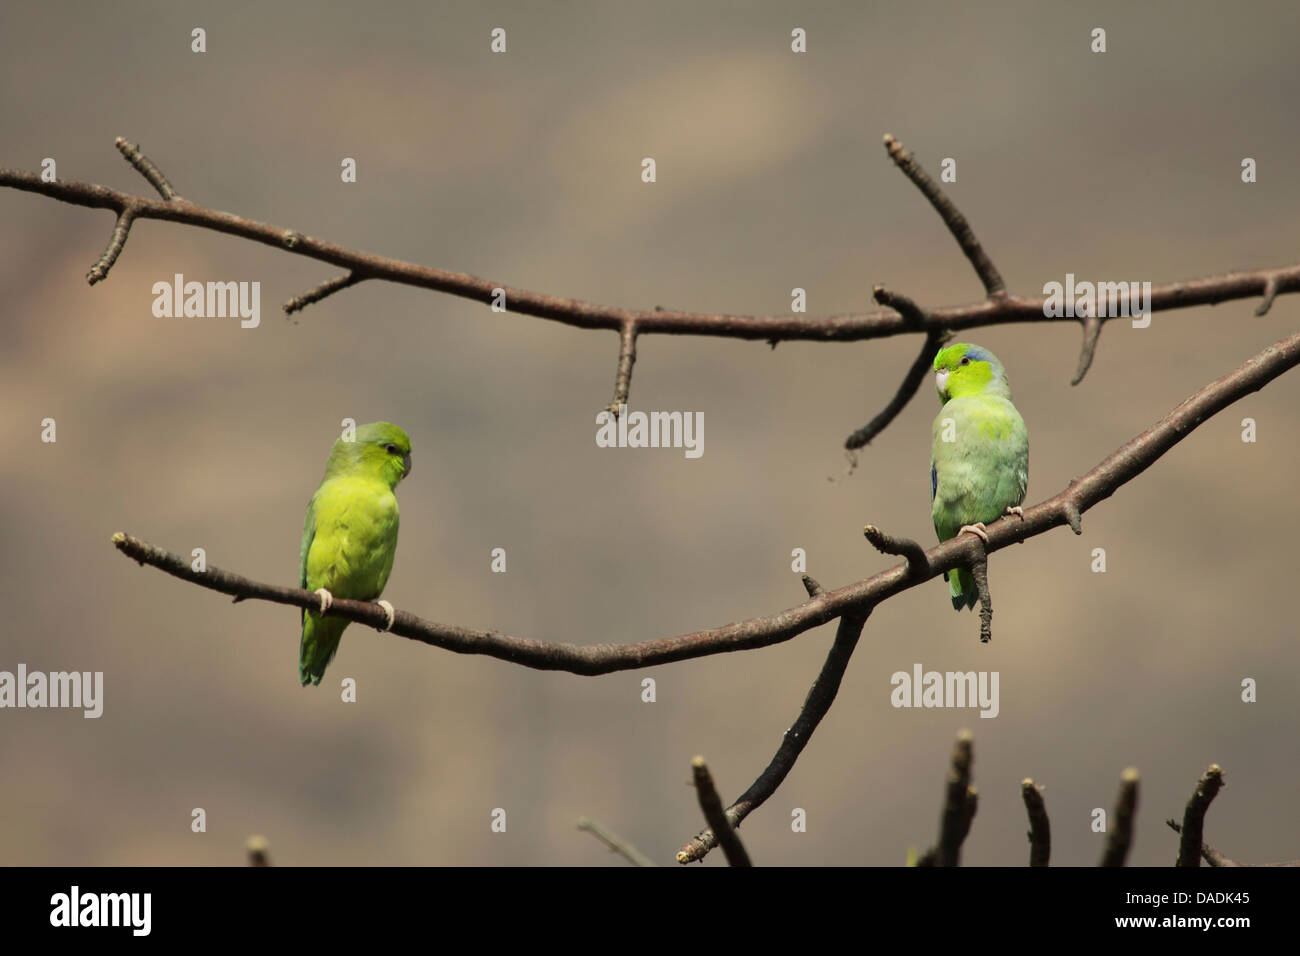 Pacific parrotlet (Forpus coelestis), two parrots in tree looking at each other, Peru, Lambayeque, Reserva Chaparri Stock Photo